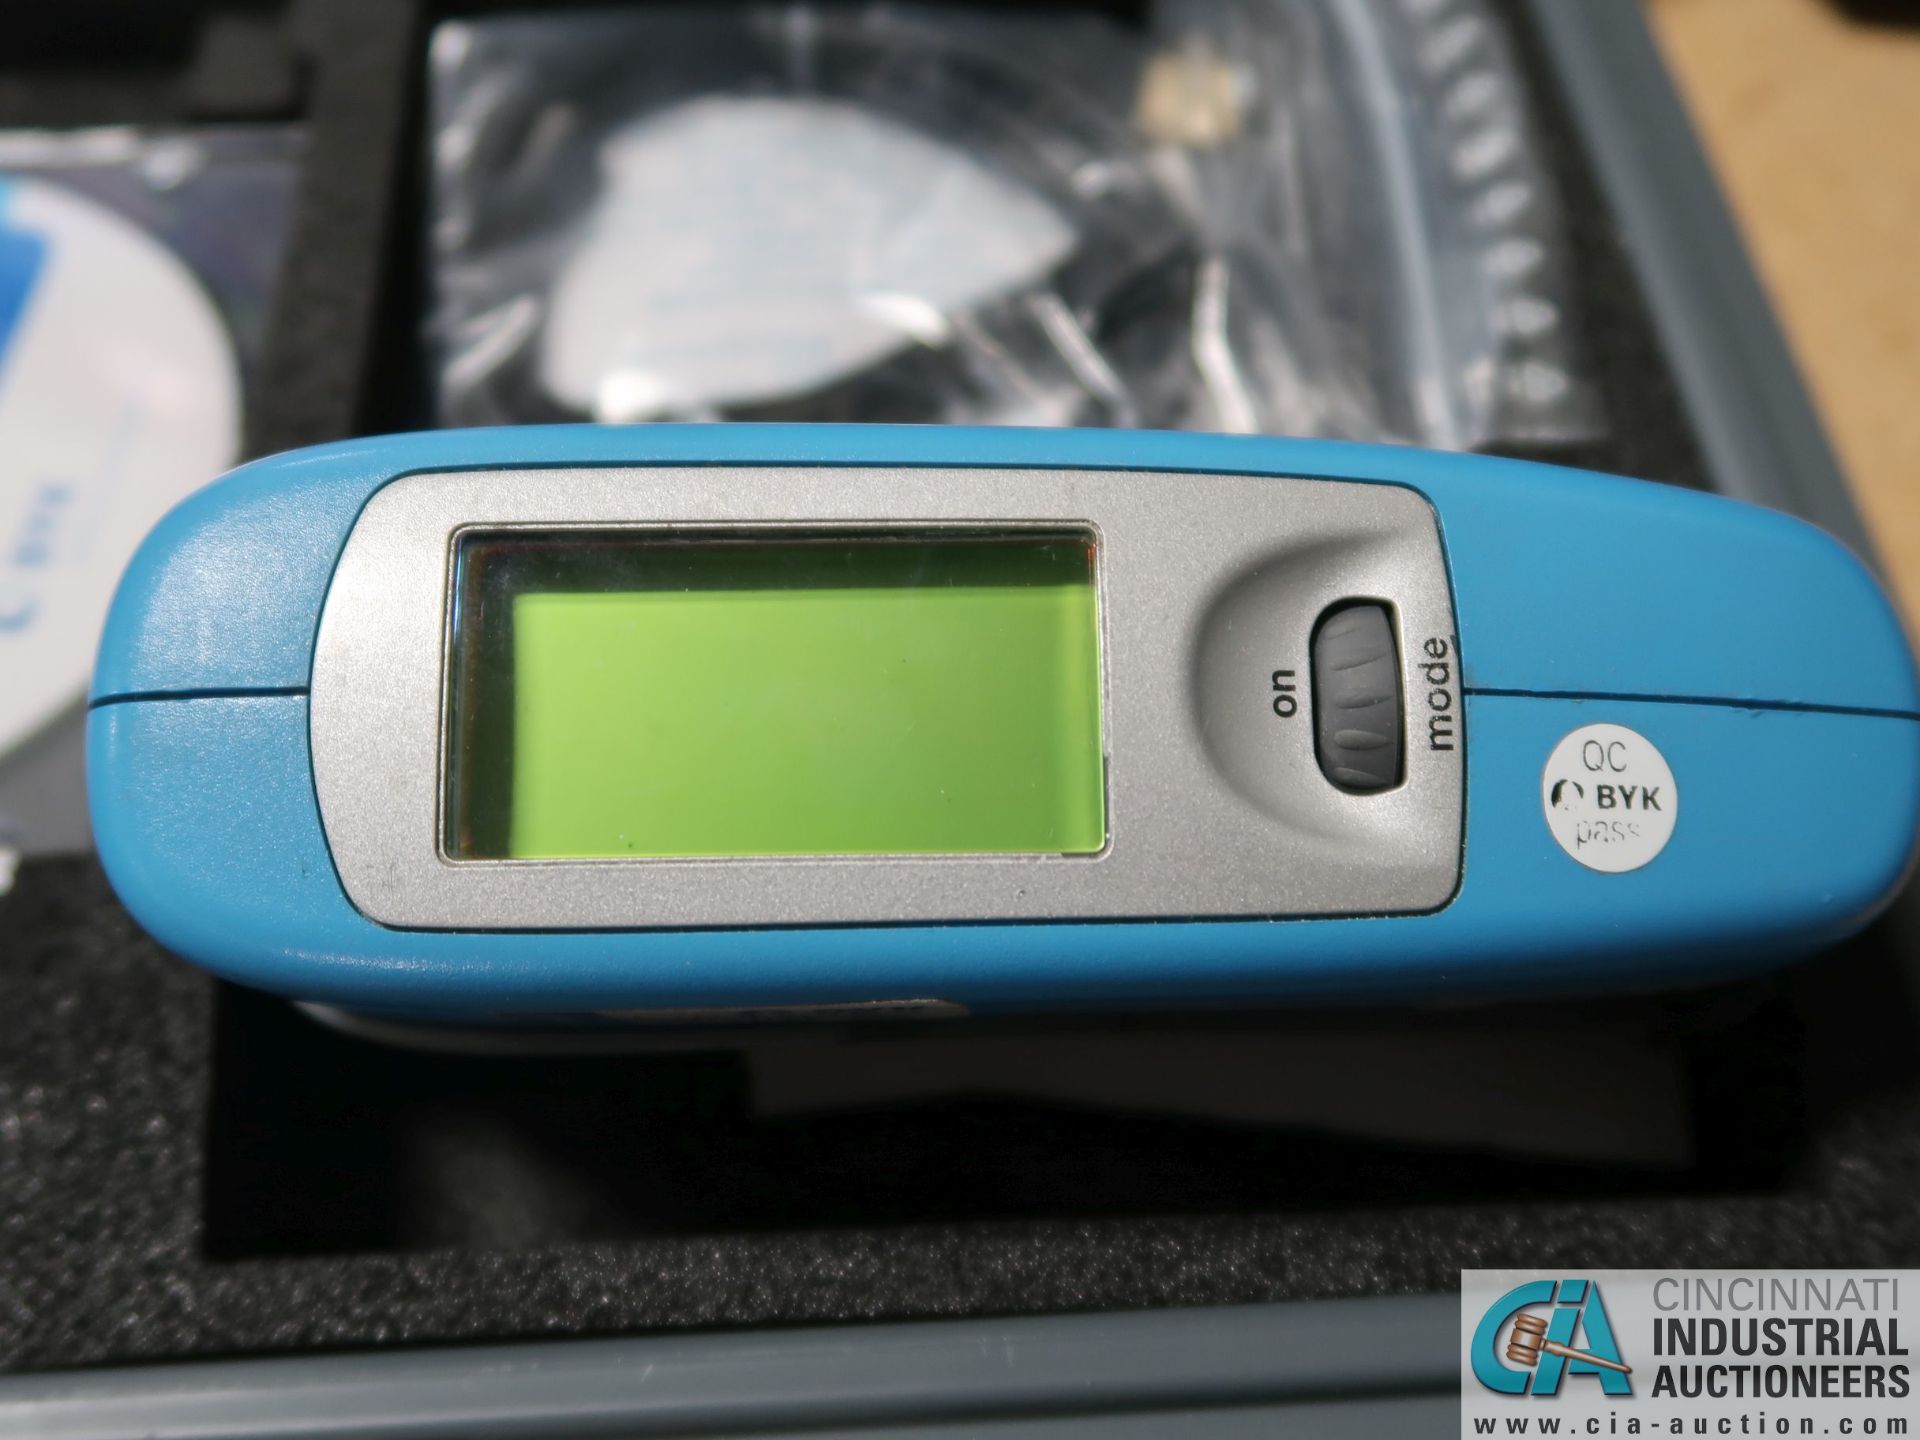 60 DEGREE BYT/GARDNER CAT NO. 4442 MICRO-GLASS REFLECTOMETER - Image 2 of 4